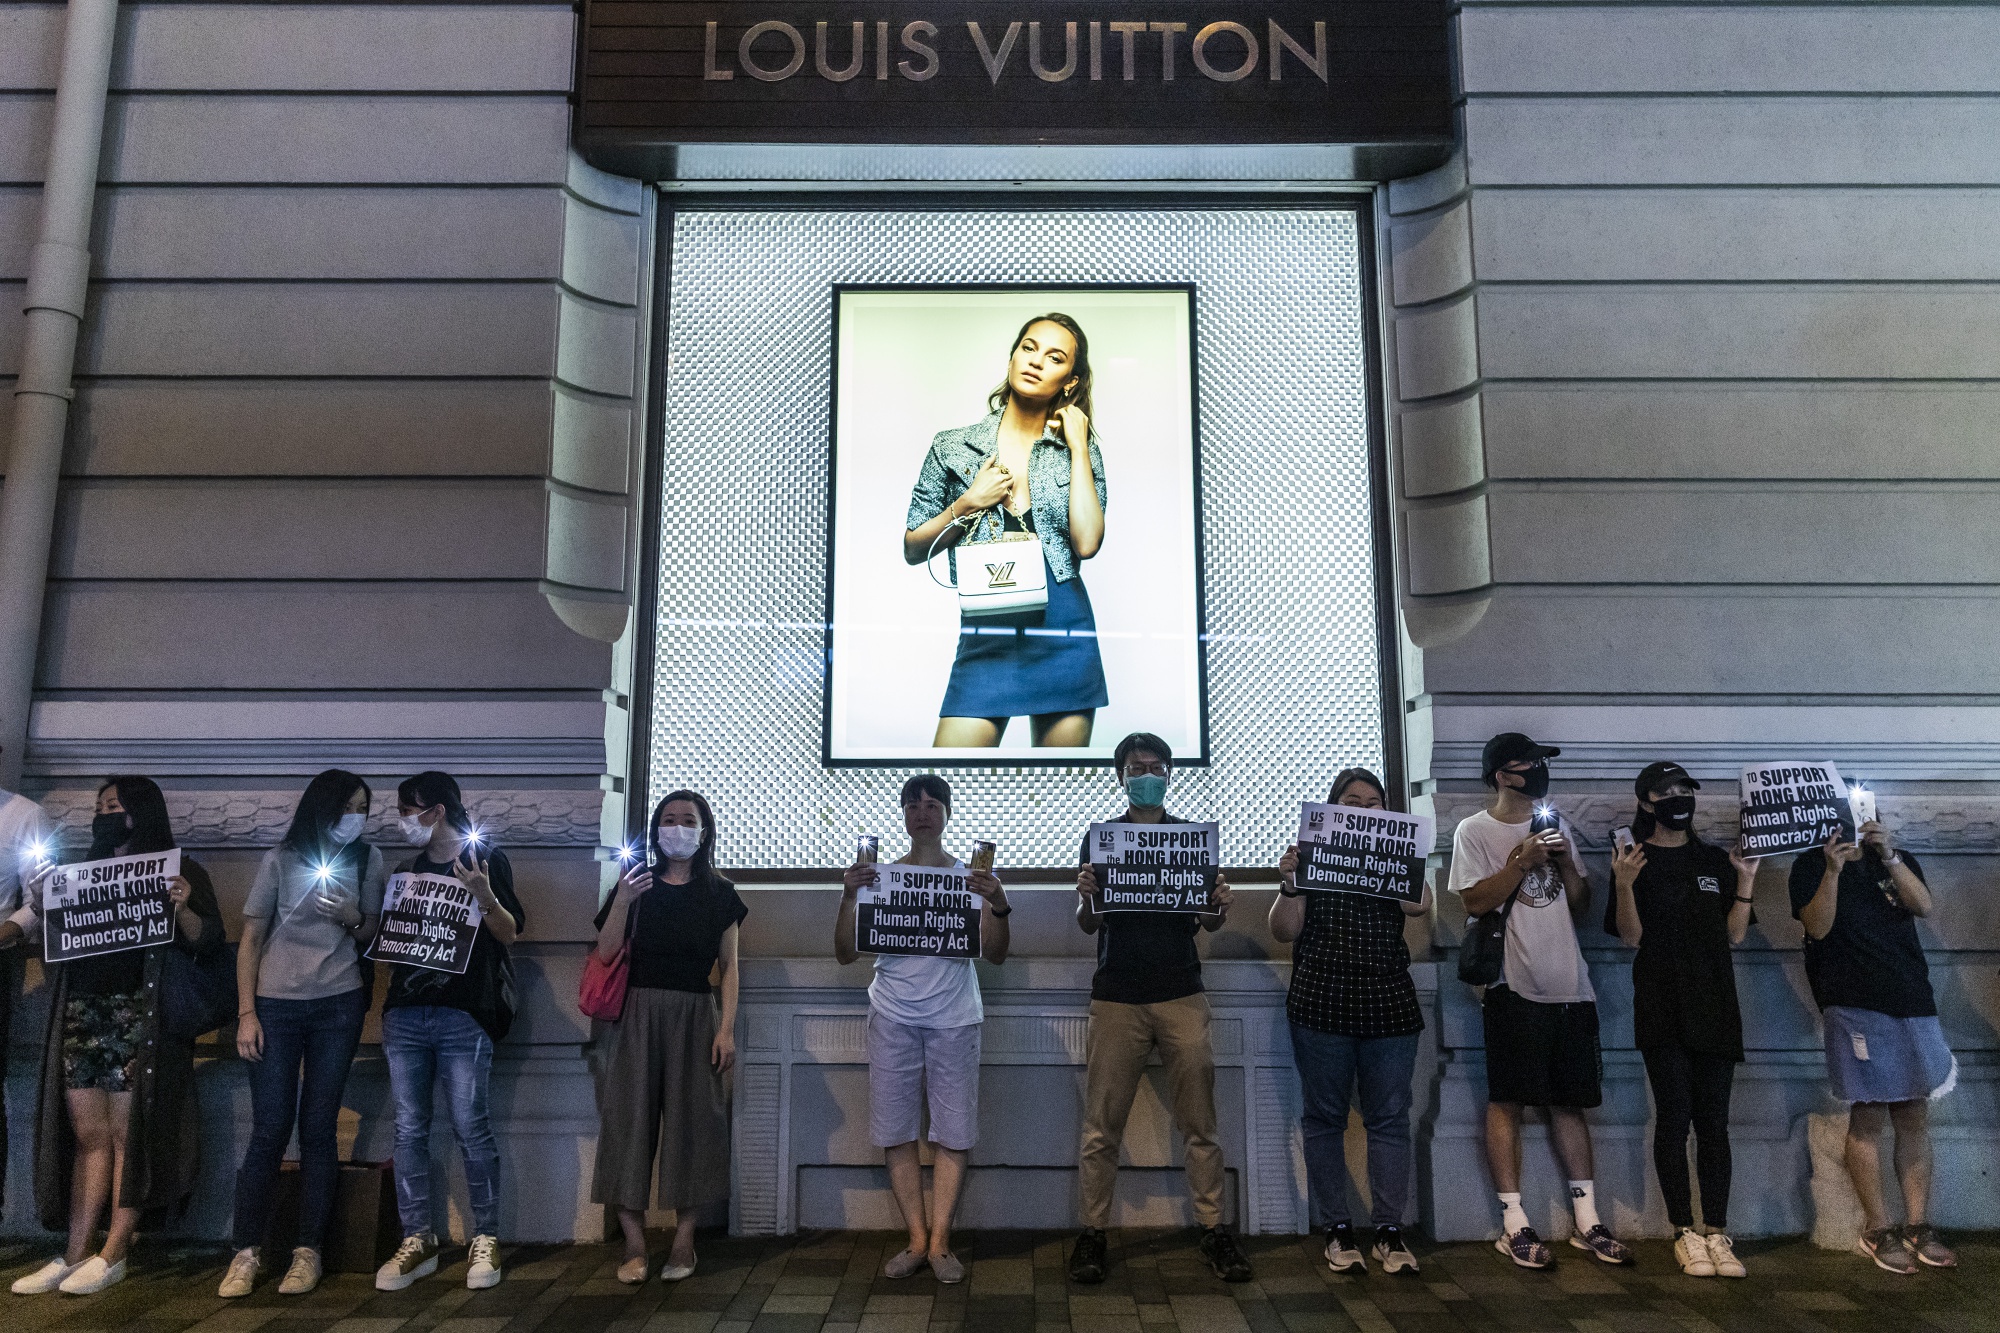 LVMH Share Price Rises to Record as Chinese Consumers Drive Sales